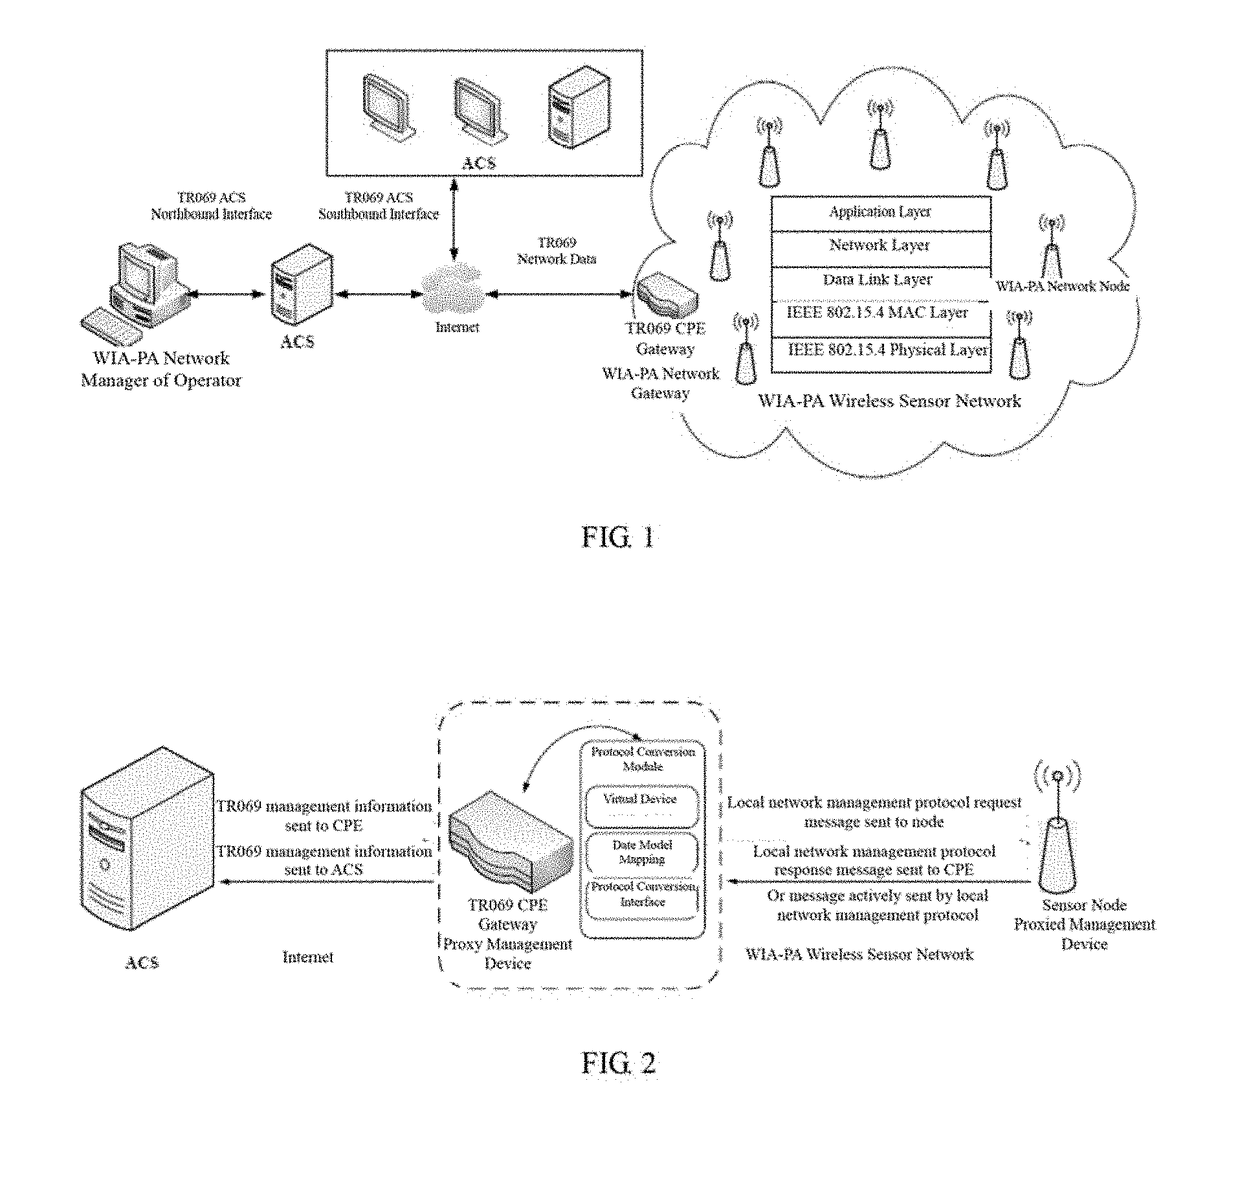 Tr069 protocol management method oriented to wia-pa network